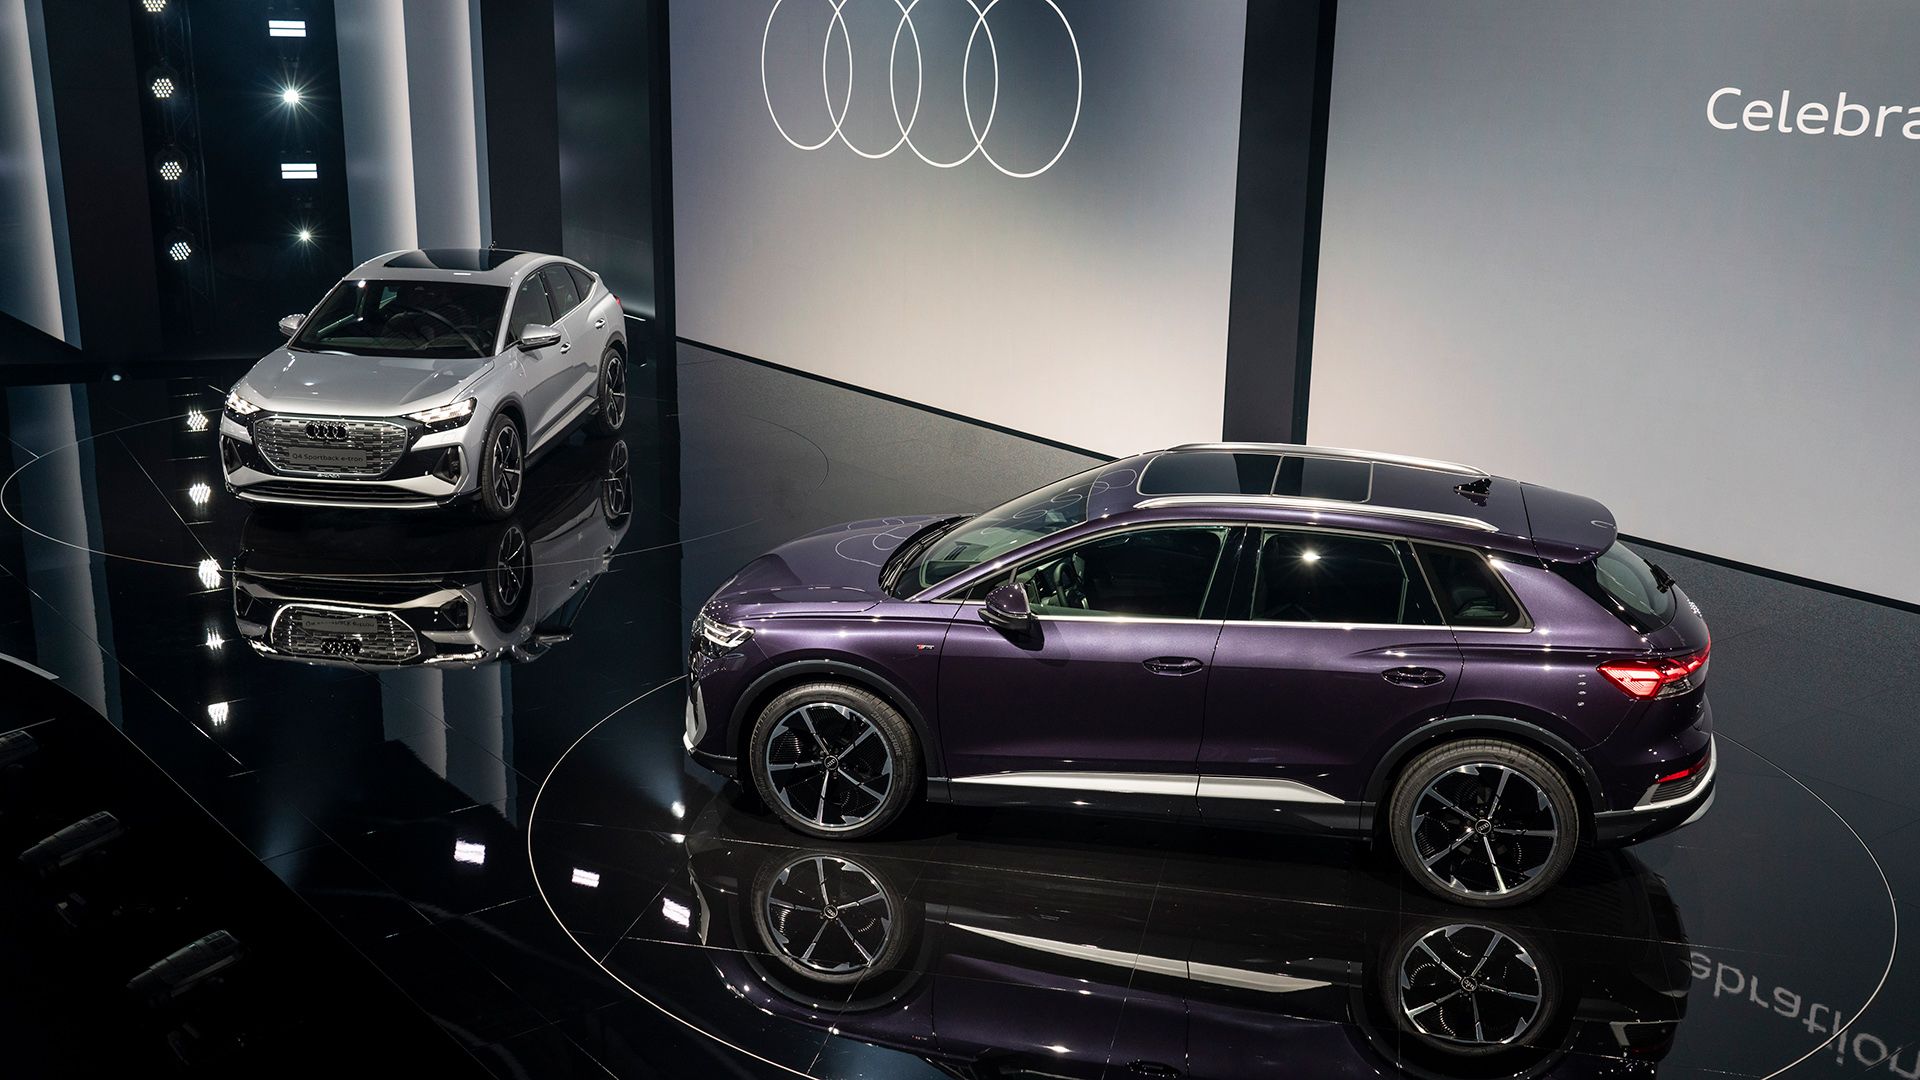 Two Audi Q4 e-tron models can be seen on the stage – silver and purple.